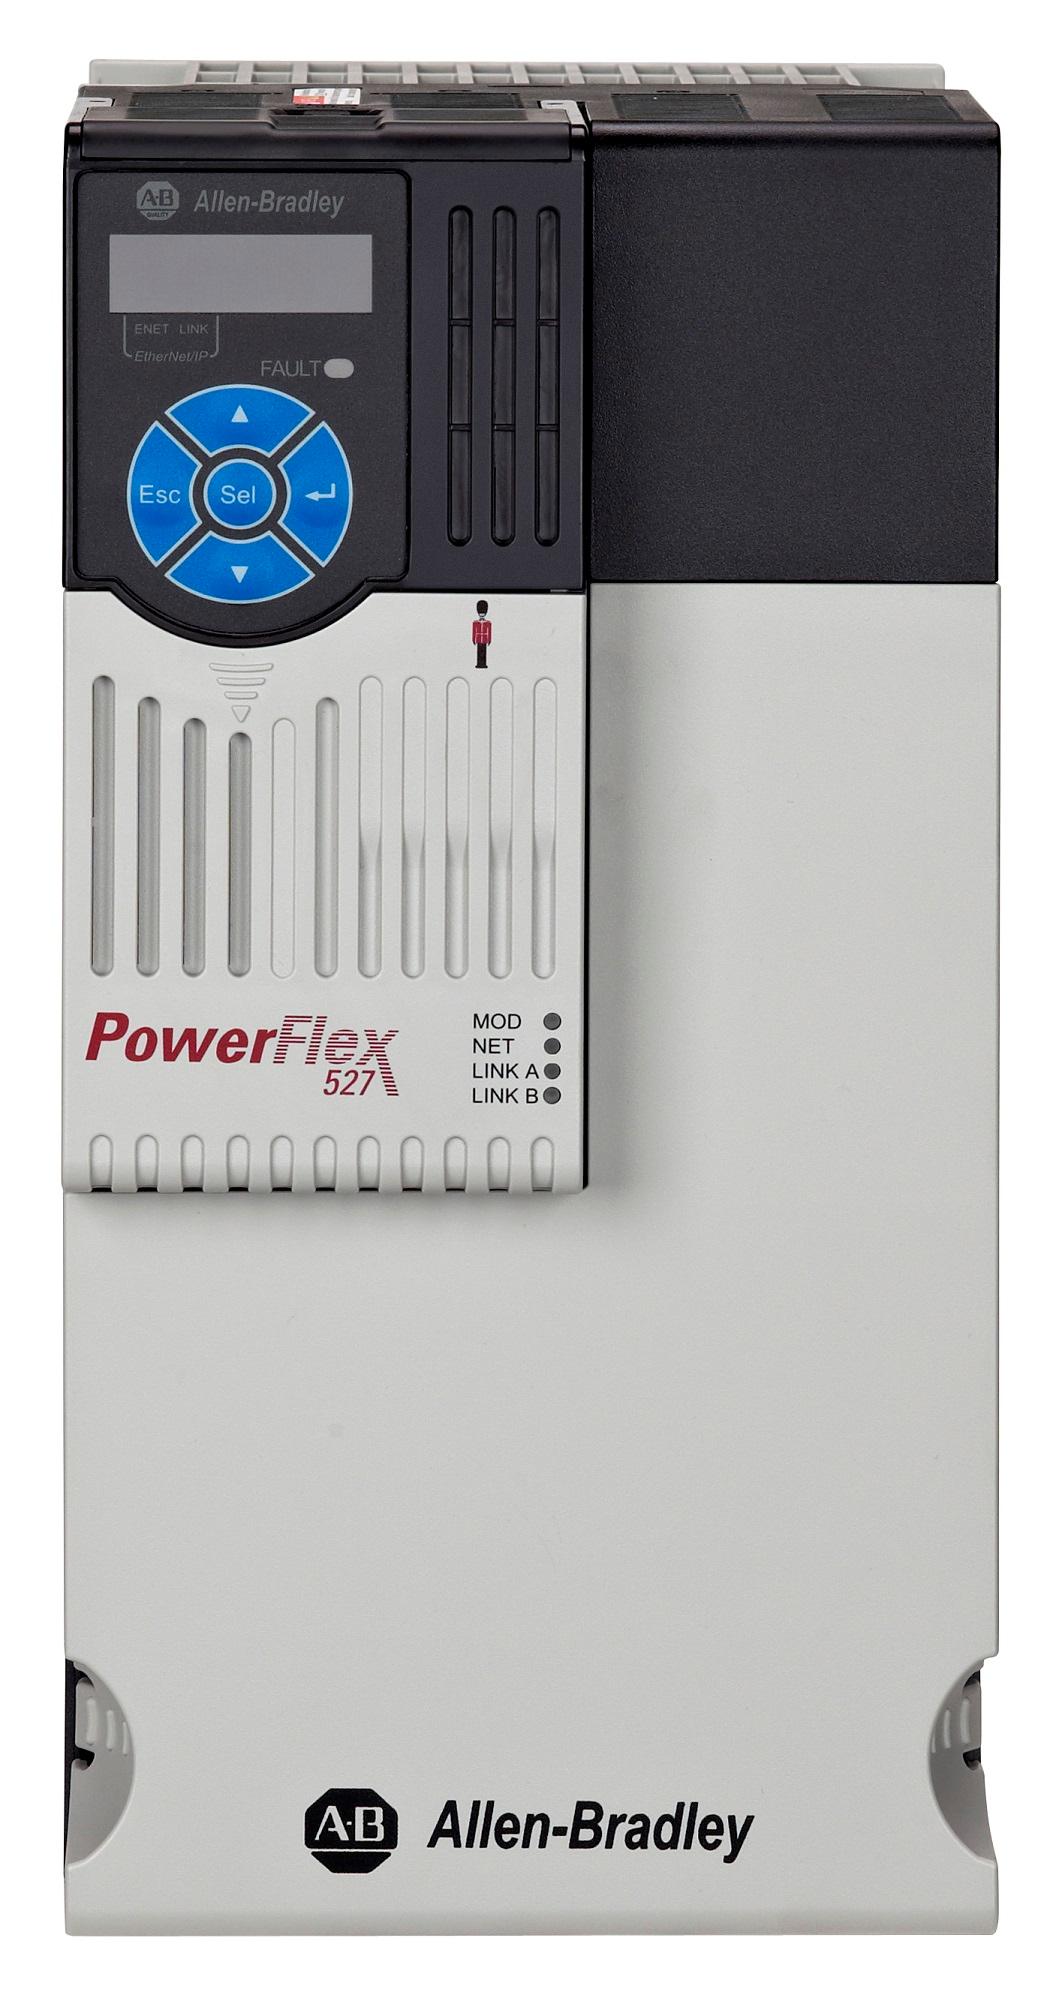 Allen Bradley 25C-D024N104  PowerFlex 527 AC Drive, with Embedded Dual Port EtherNet/IP and Integrated Safety, 480 VAC, 3 Phase, 24 Amps, 15 HP, 11 kW Normal Duty; 15 HP, 11 kW Heavy Duty, Frame D, IP20 NEMA / Open Type, No Filter